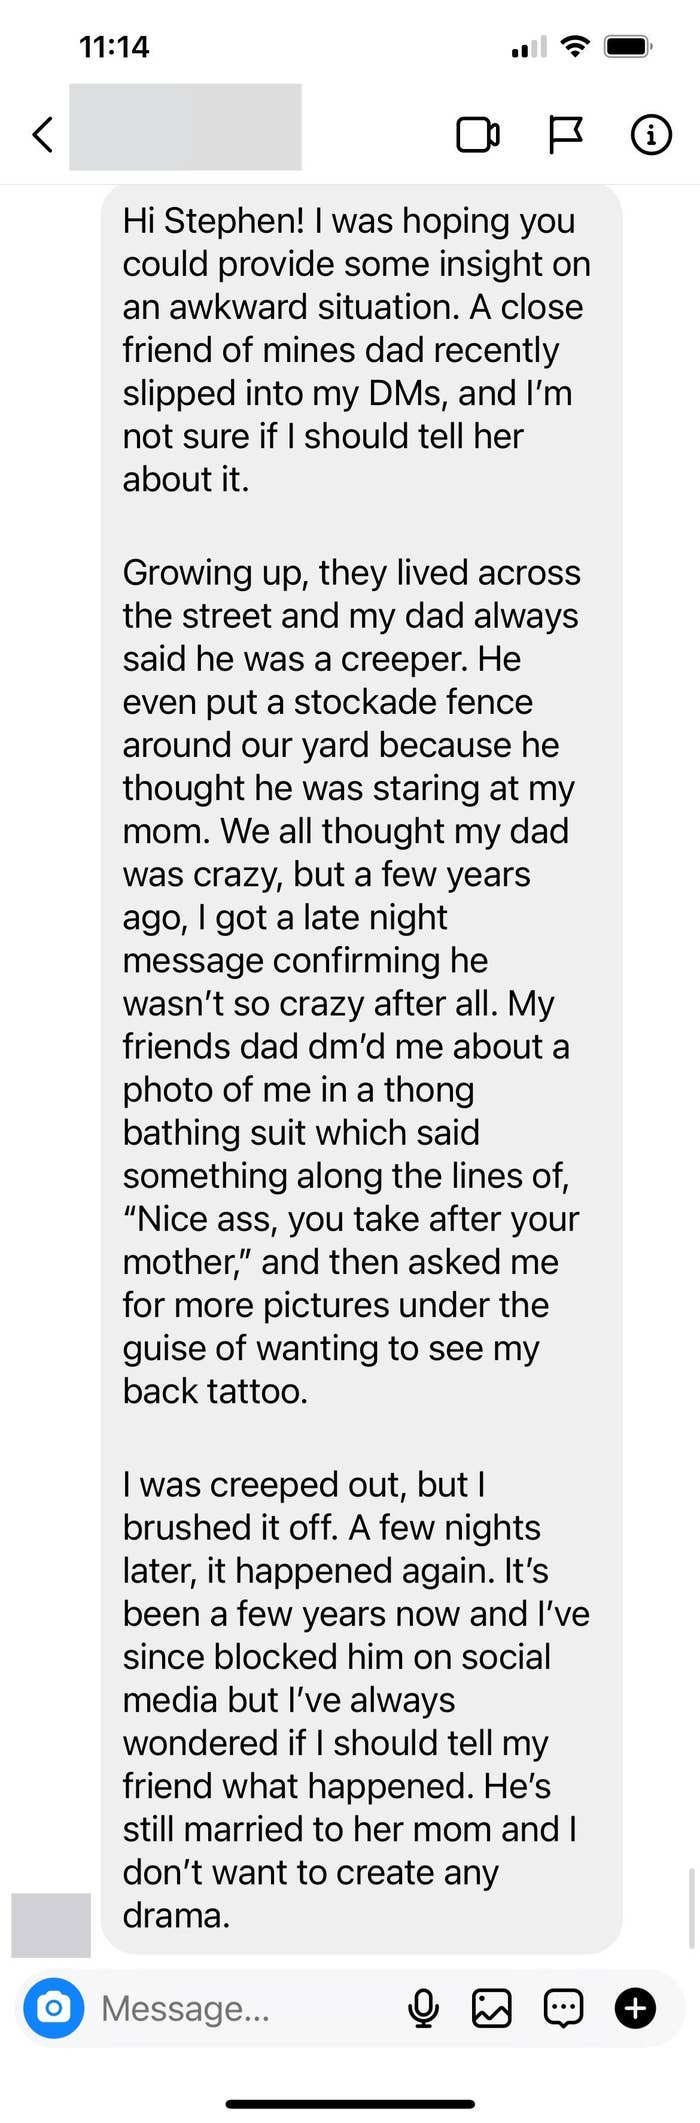 messager&#x27;s DM where she says her friend&#x27;s dad hit on her